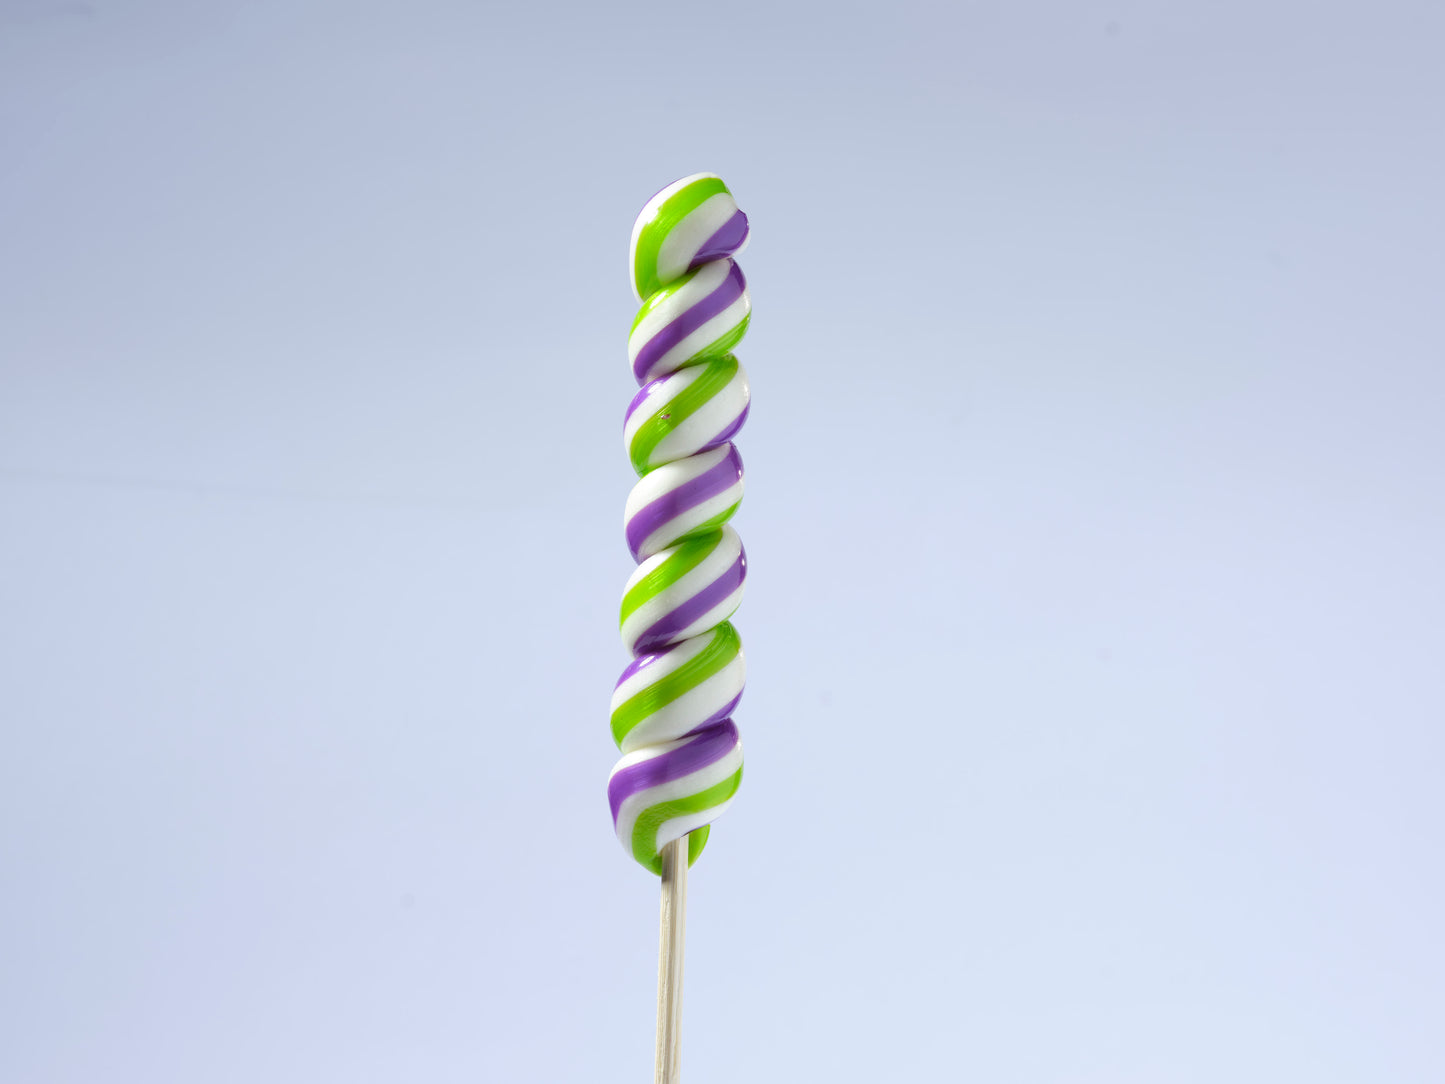 Zubi Swirl Stick Lolly (Assorted) - Enriched with Vitamin C